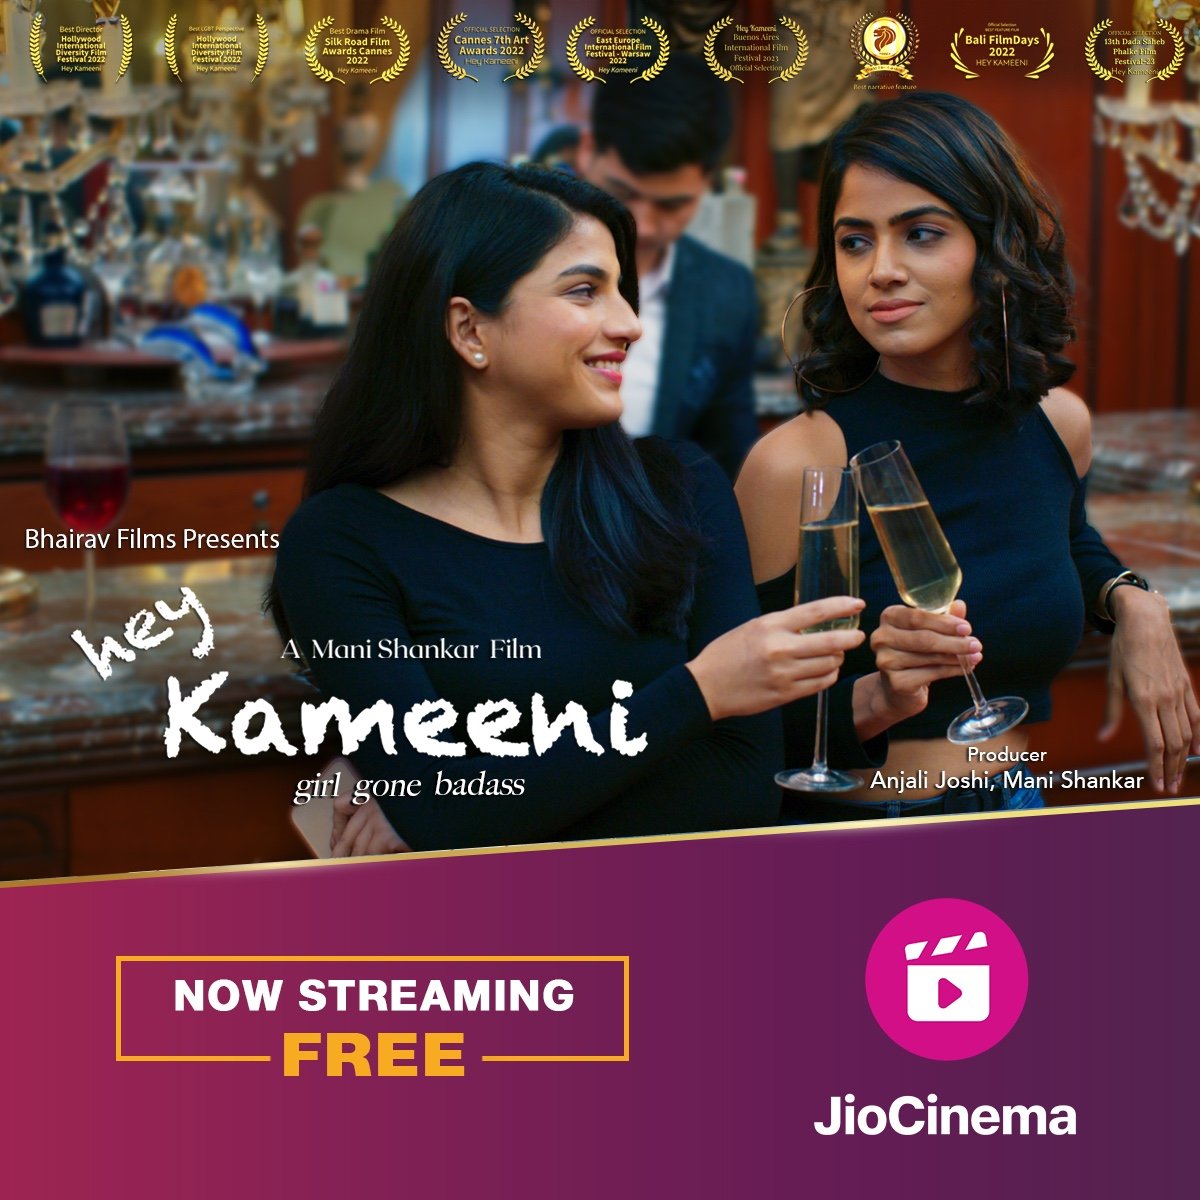 #HeyKameeni on Jio Cinema is one of the well made suspense thrillers this year. The badass lead character is a game-changer, that will make every girl want to be like her. The film kept me hooked from start to finish. Go for it if you are craving a dose of girl power! 3